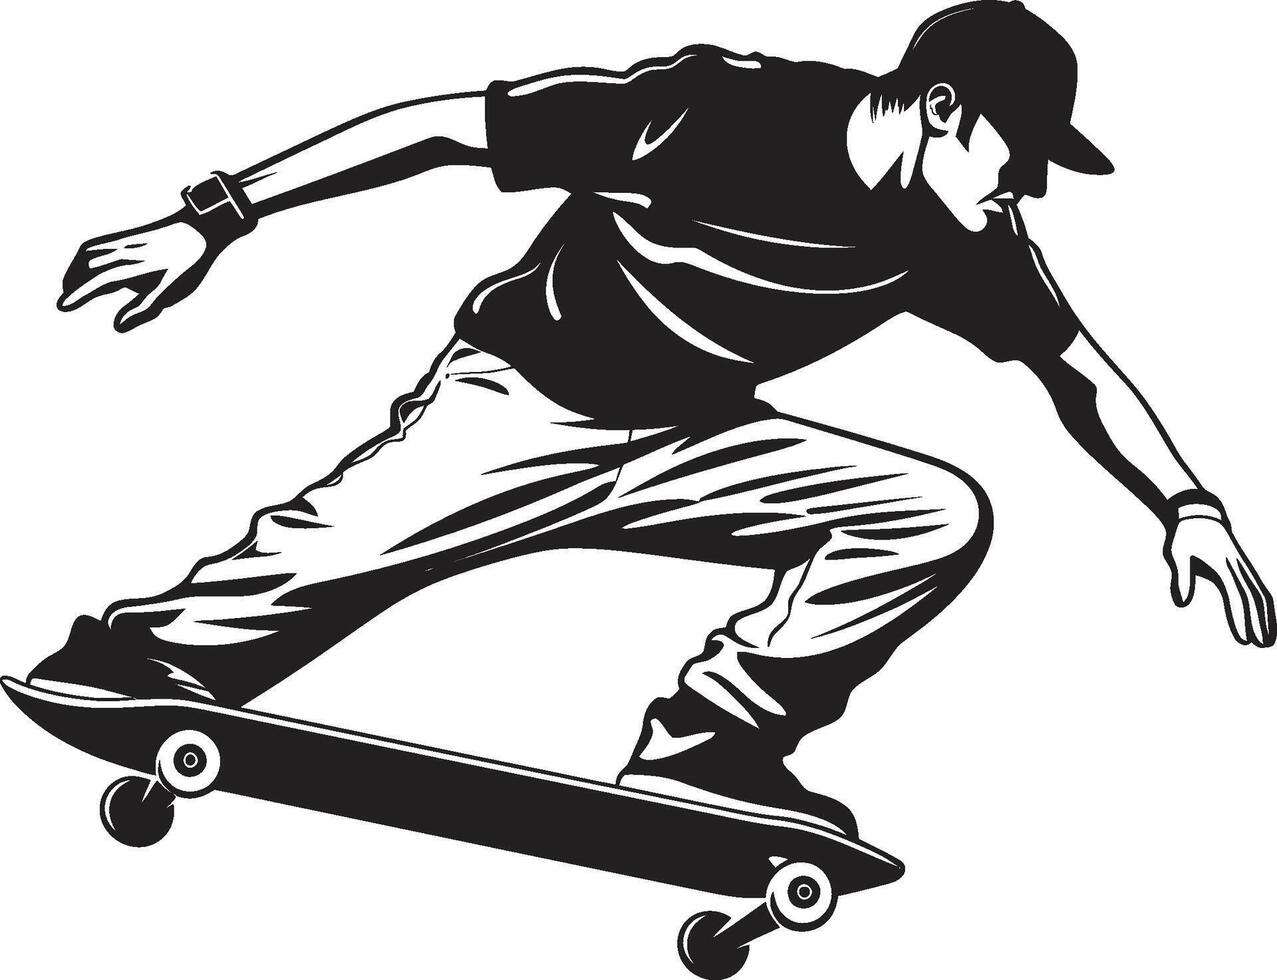 Thrill Tyrant Iconic Vector Symbol of a Man on a Skateboard in Black Street Slinger Edgy Black Logo Design with a Skateboarding Man Icon